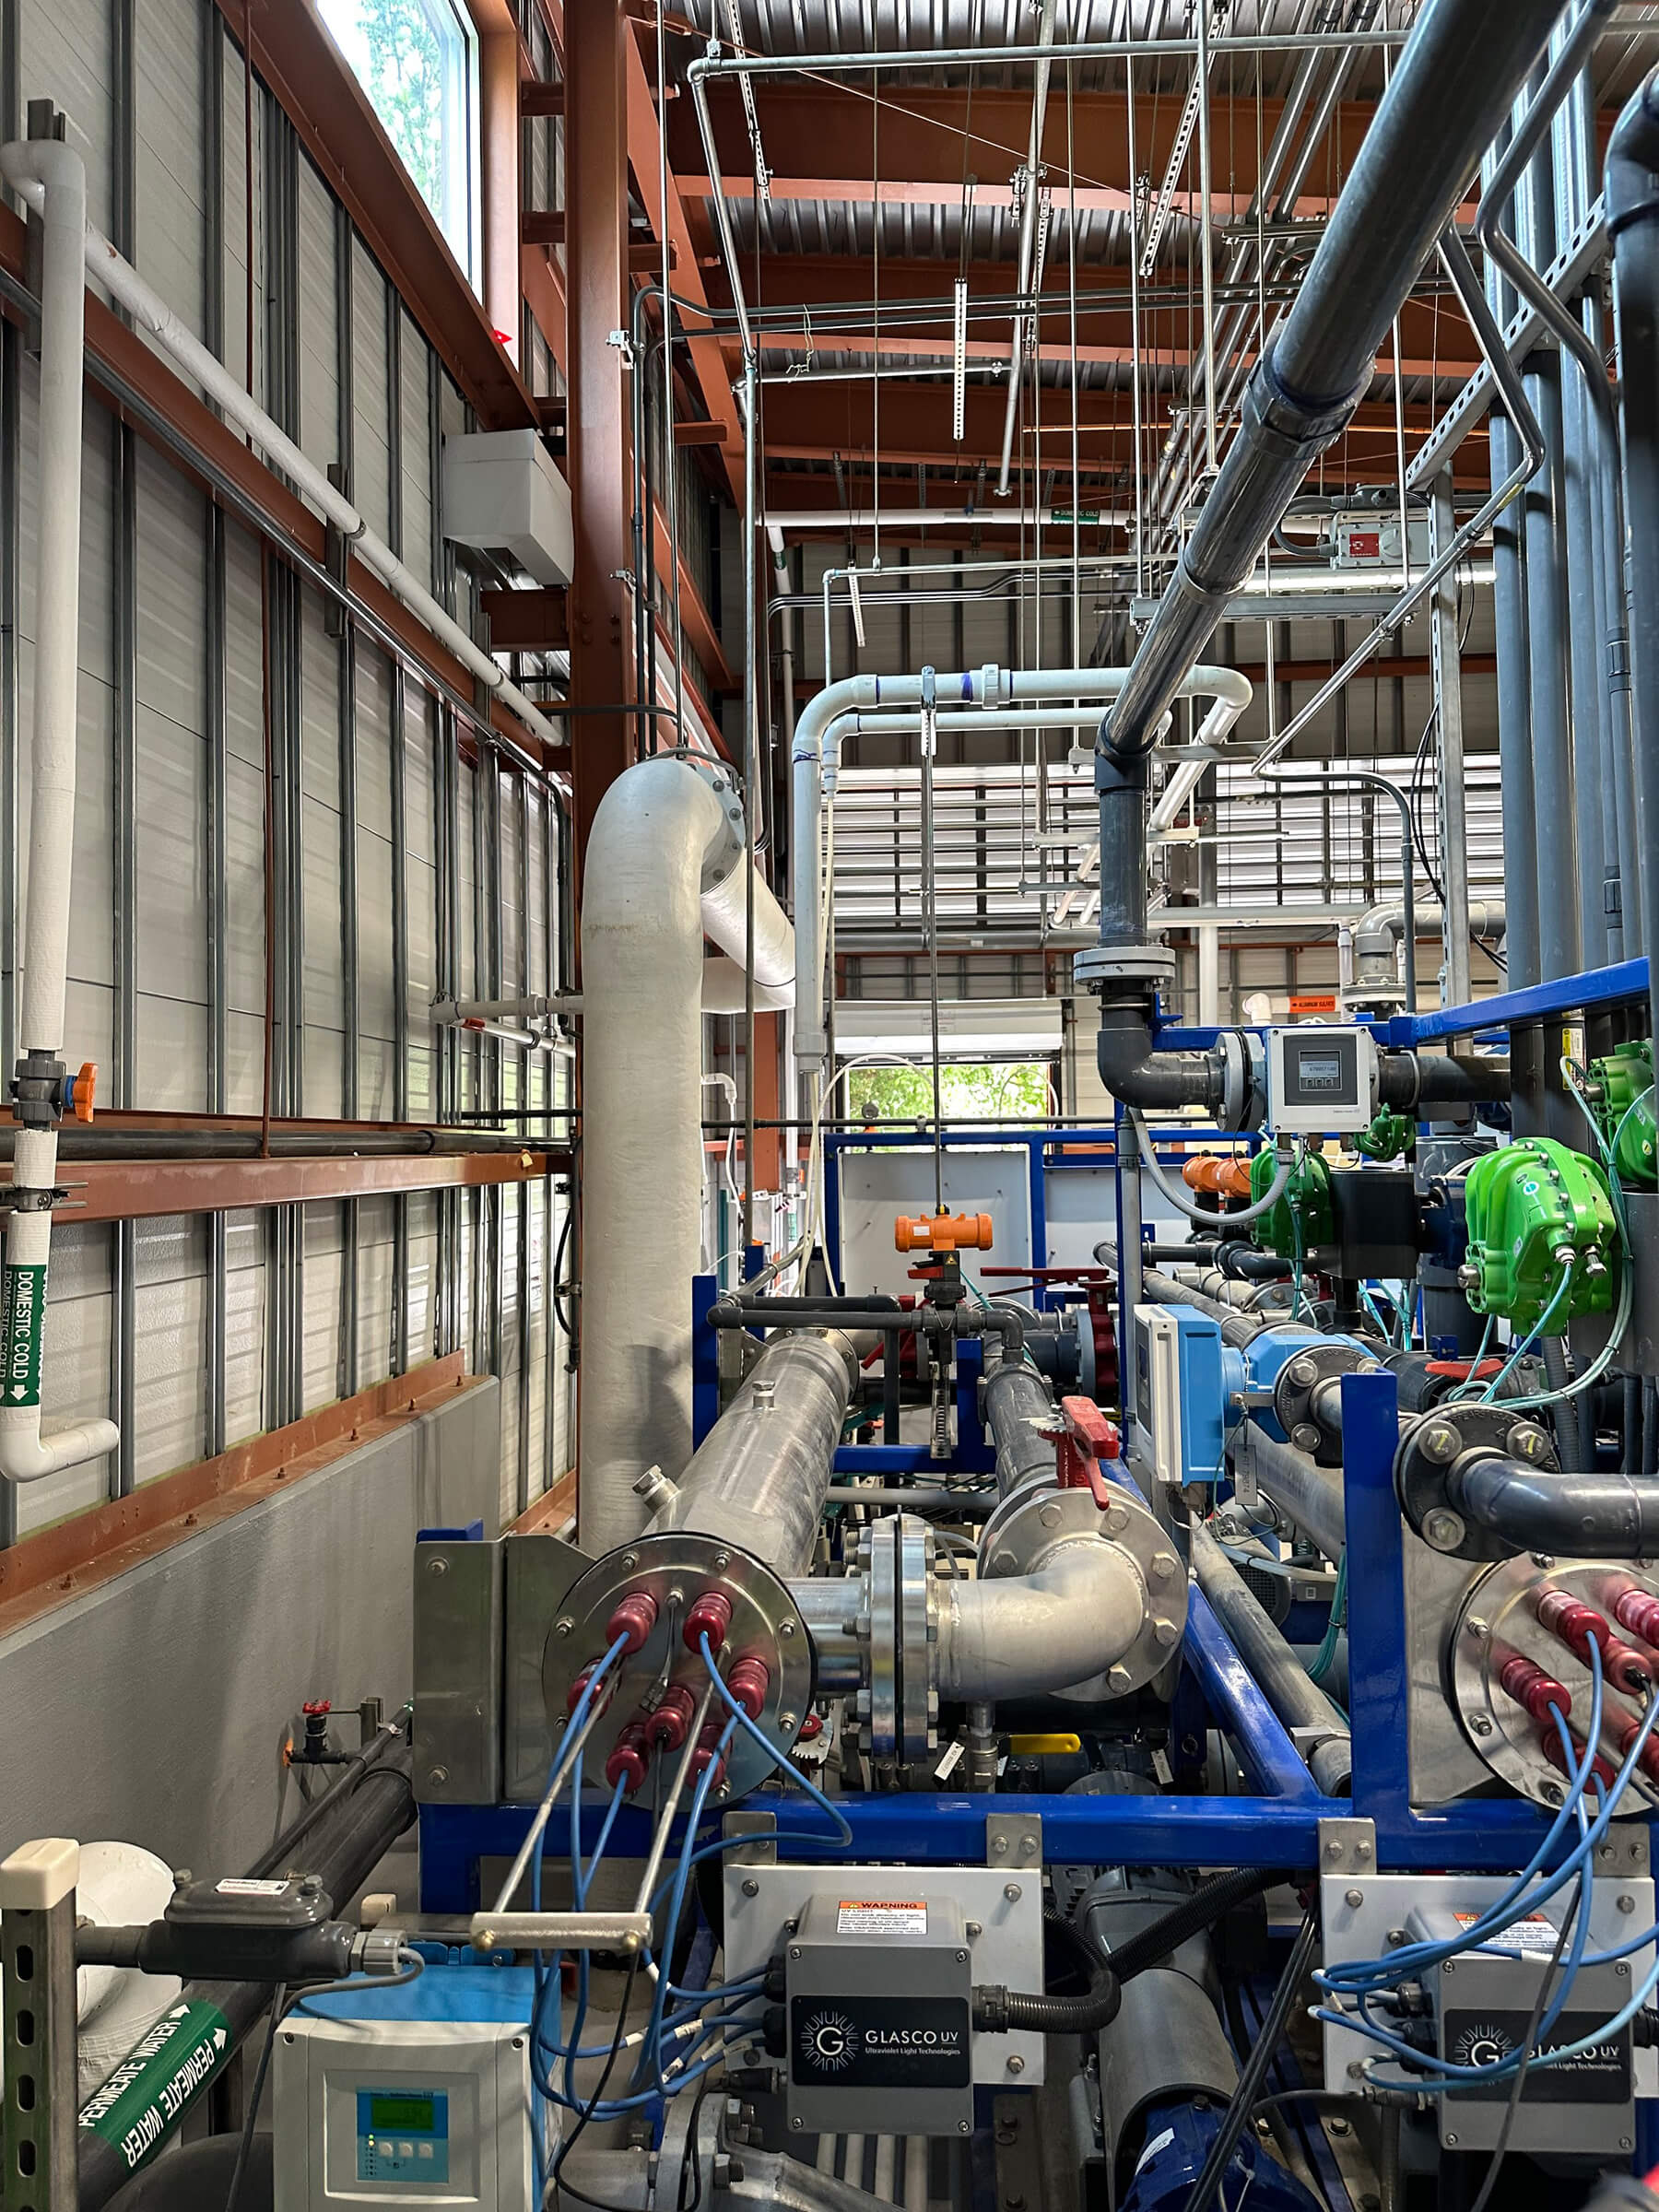 pipes and mechanical equipment inside building